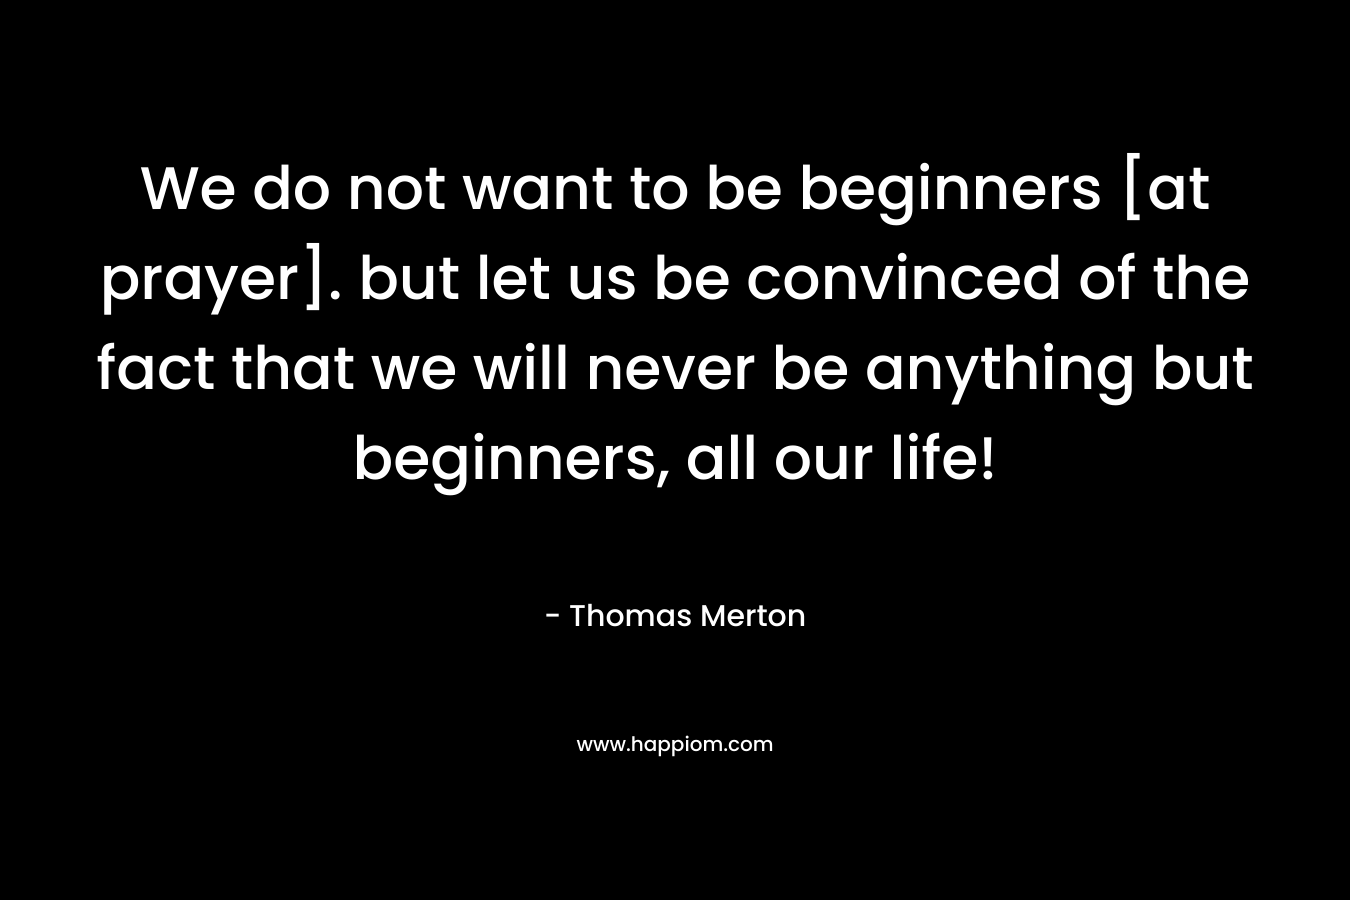 We do not want to be beginners [at prayer]. but let us be convinced of the fact that we will never be anything but beginners, all our life! – Thomas Merton